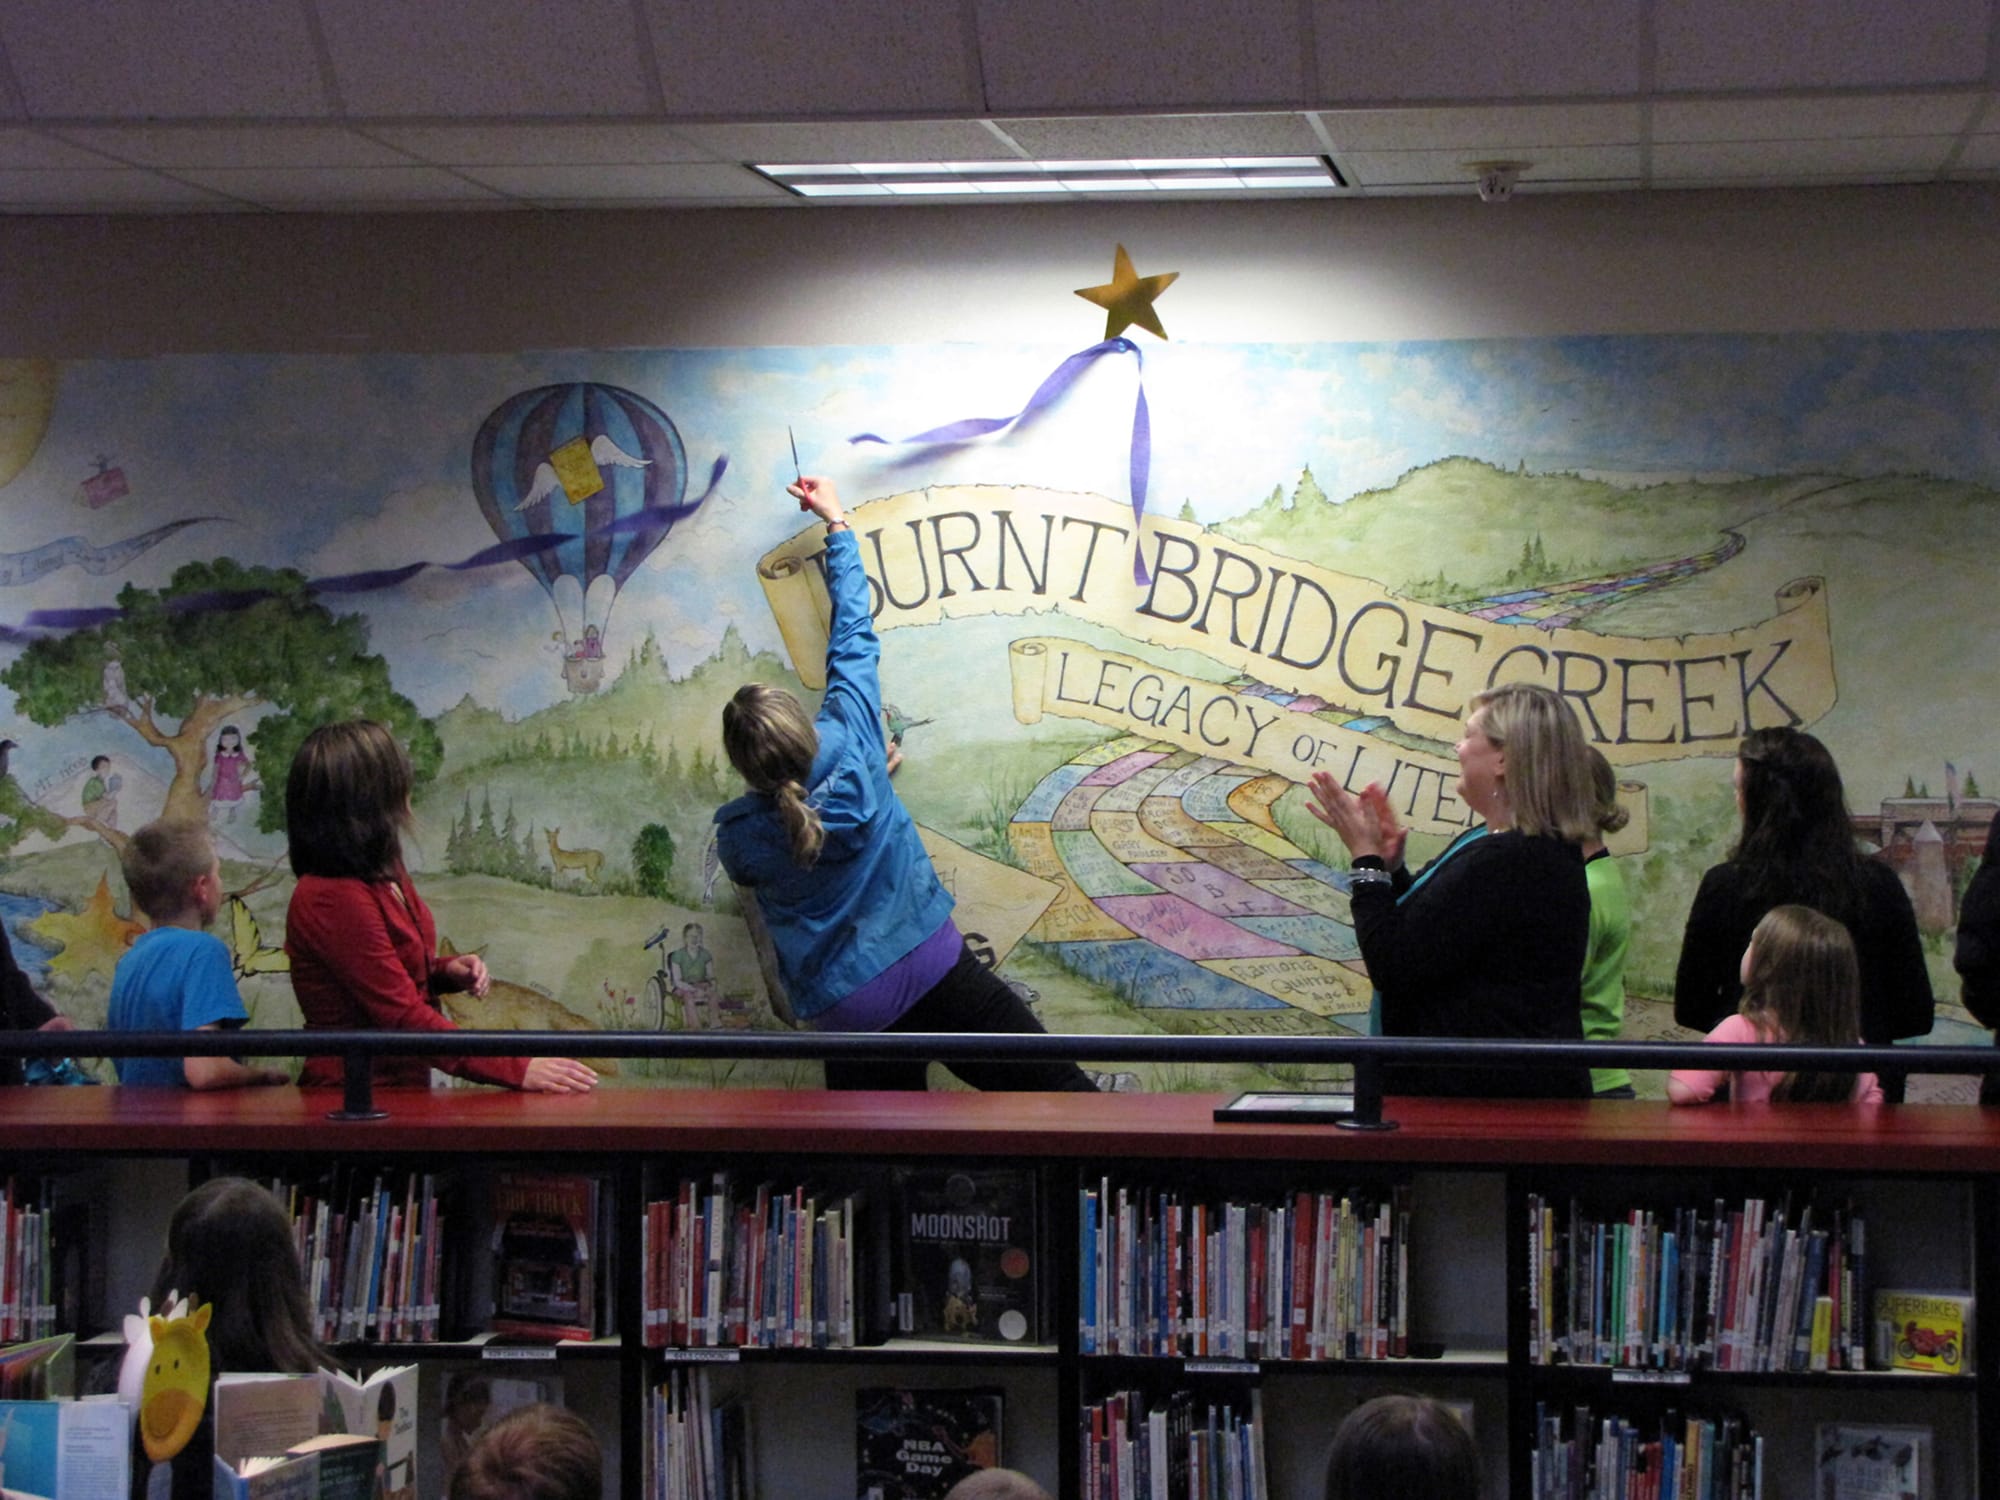 Students and staff at Burnt Bridge Creek Elementary School celebrate the unveiling of a new mural in their library painted by parent Eve Ellis-Carlson.